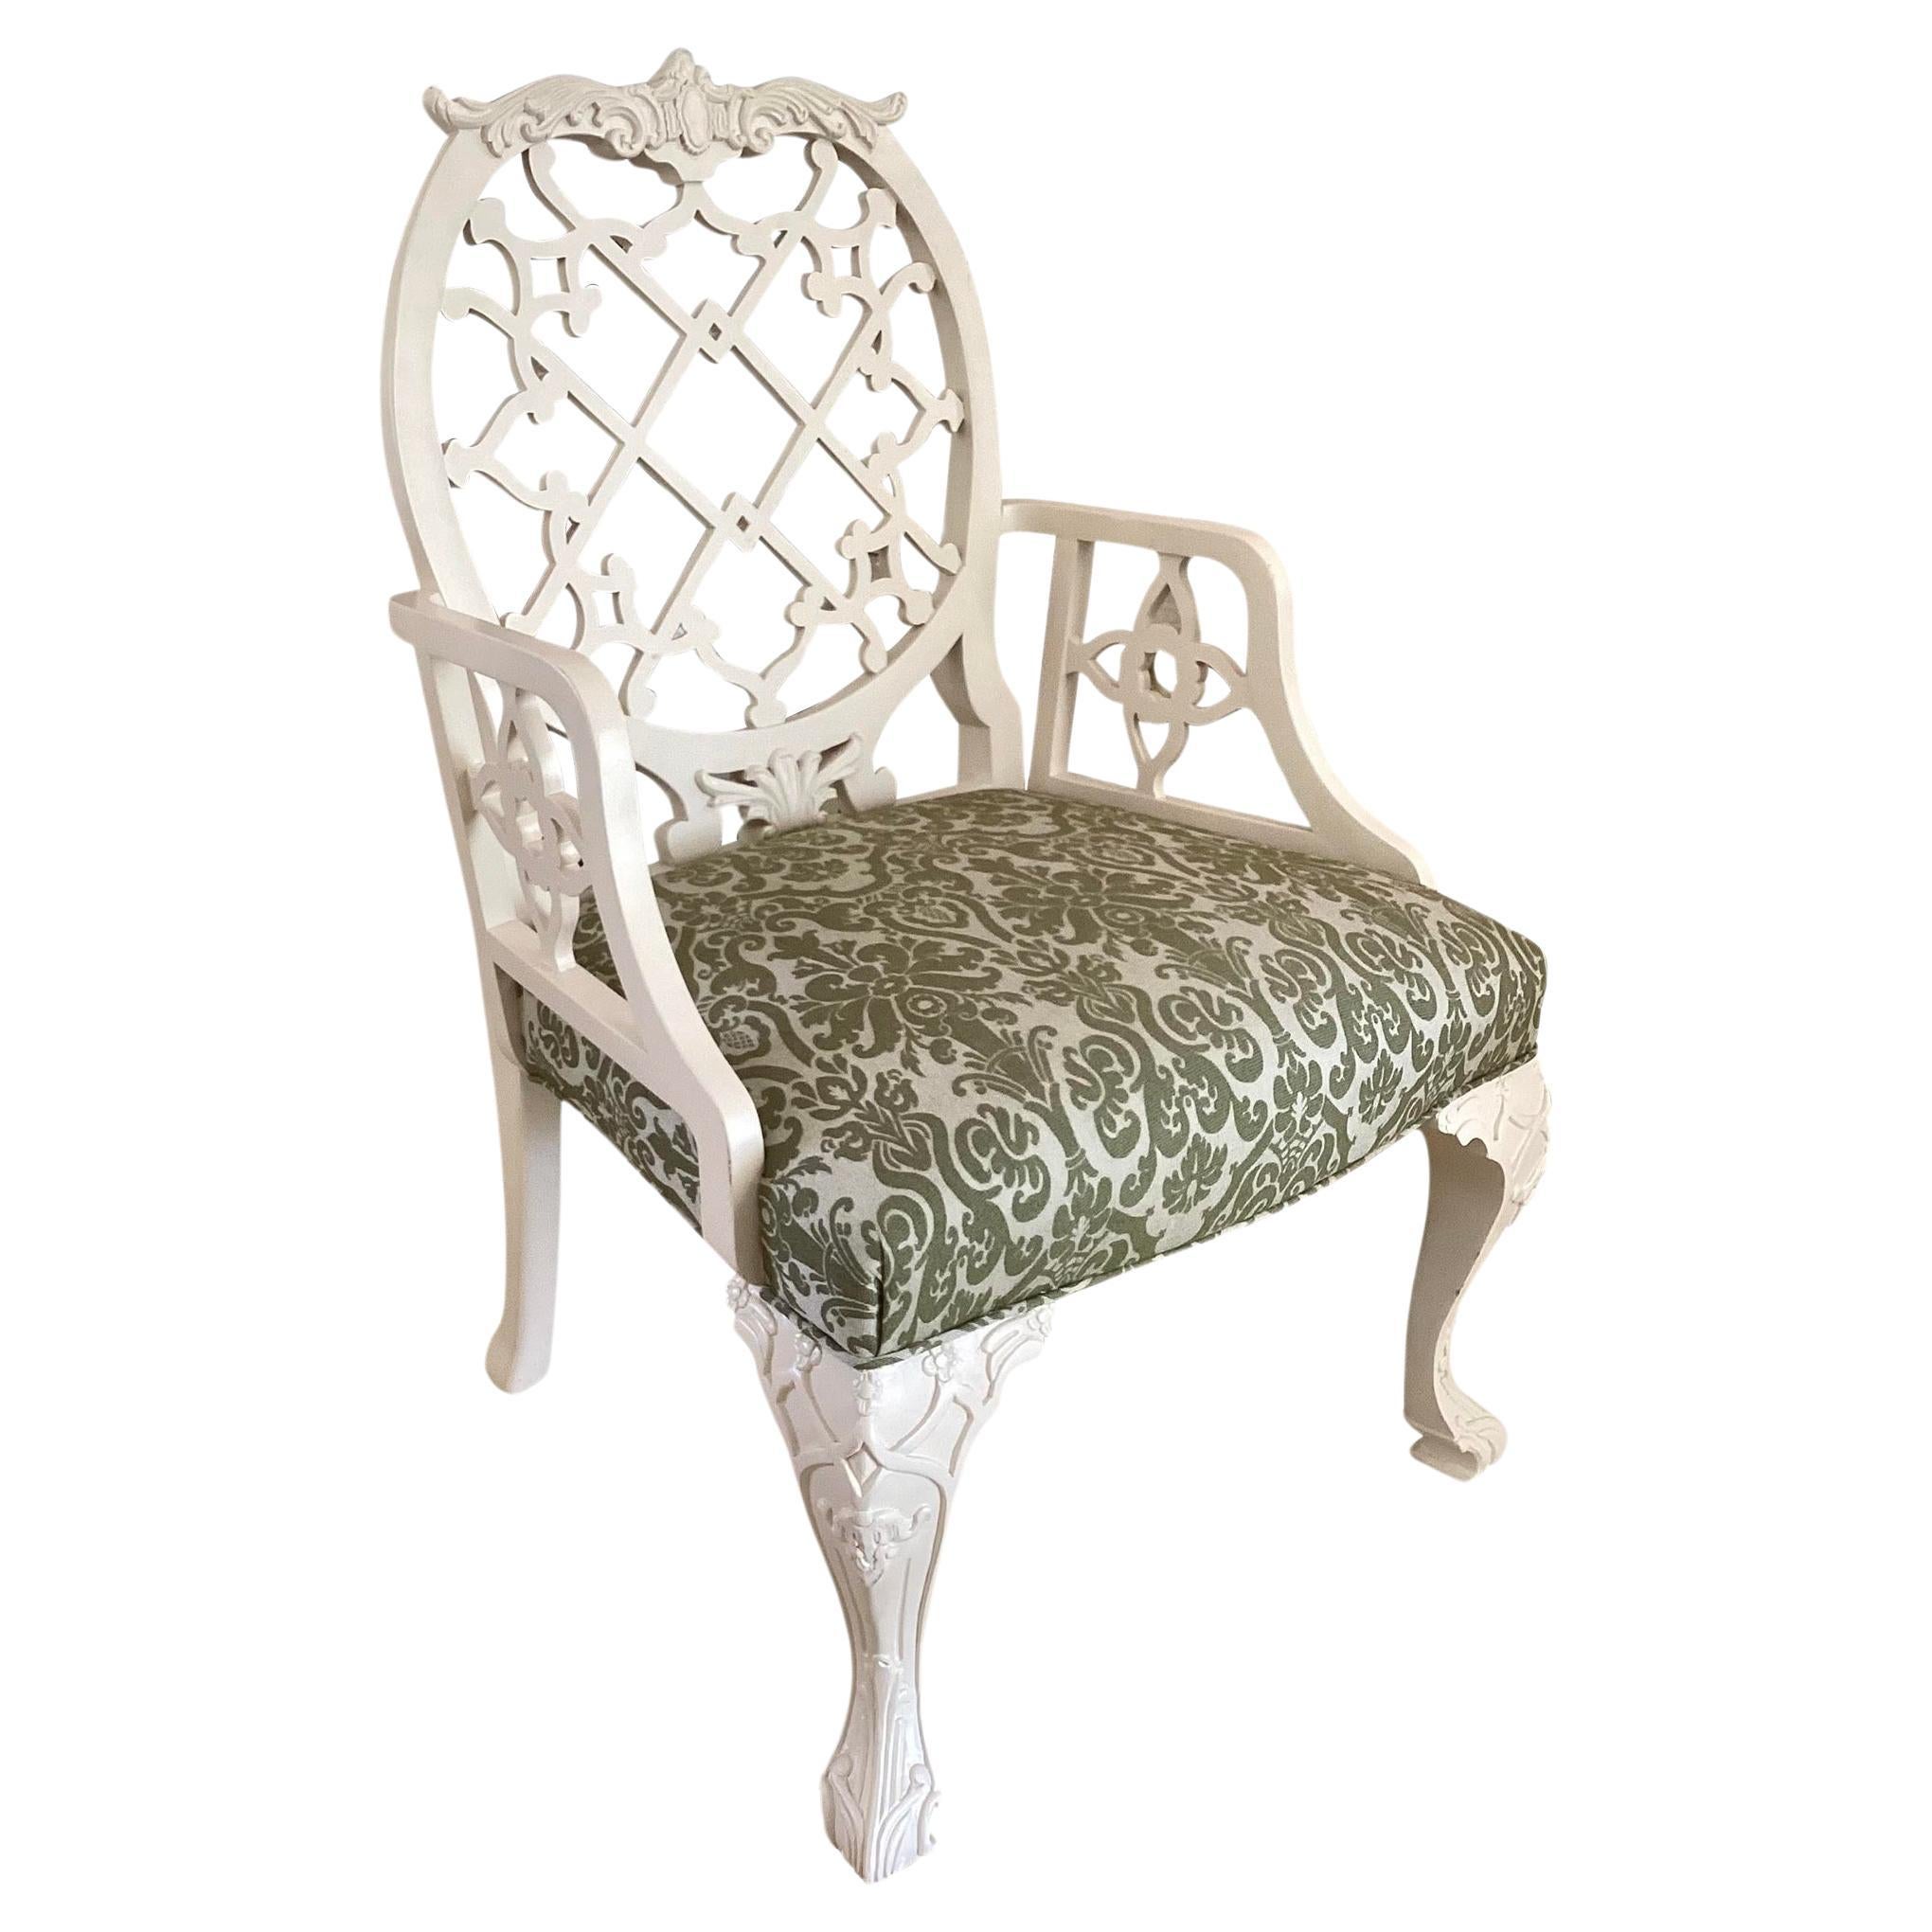 Contemporary Oscar De La Renta Armchair in Ivory Finish and Todd Hase Upholstery For Sale